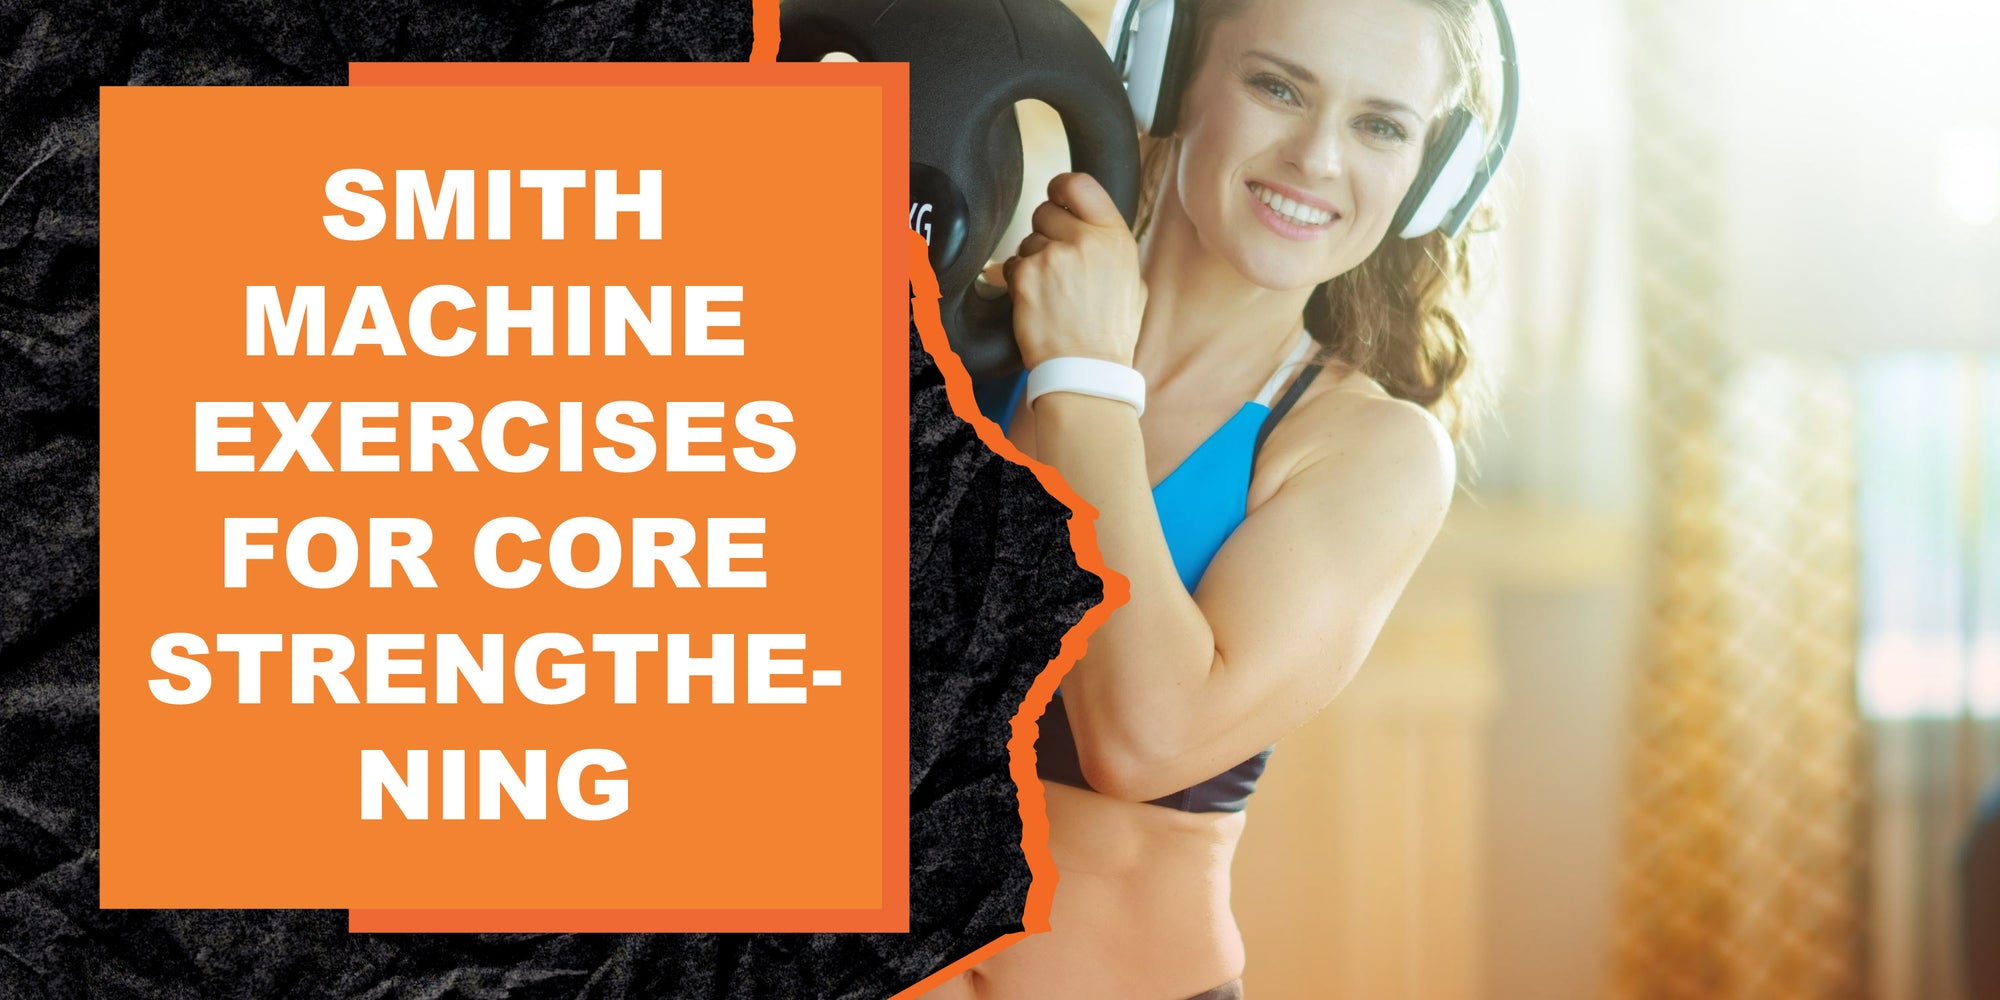 Smith Machine Exercises for Core Strengthening